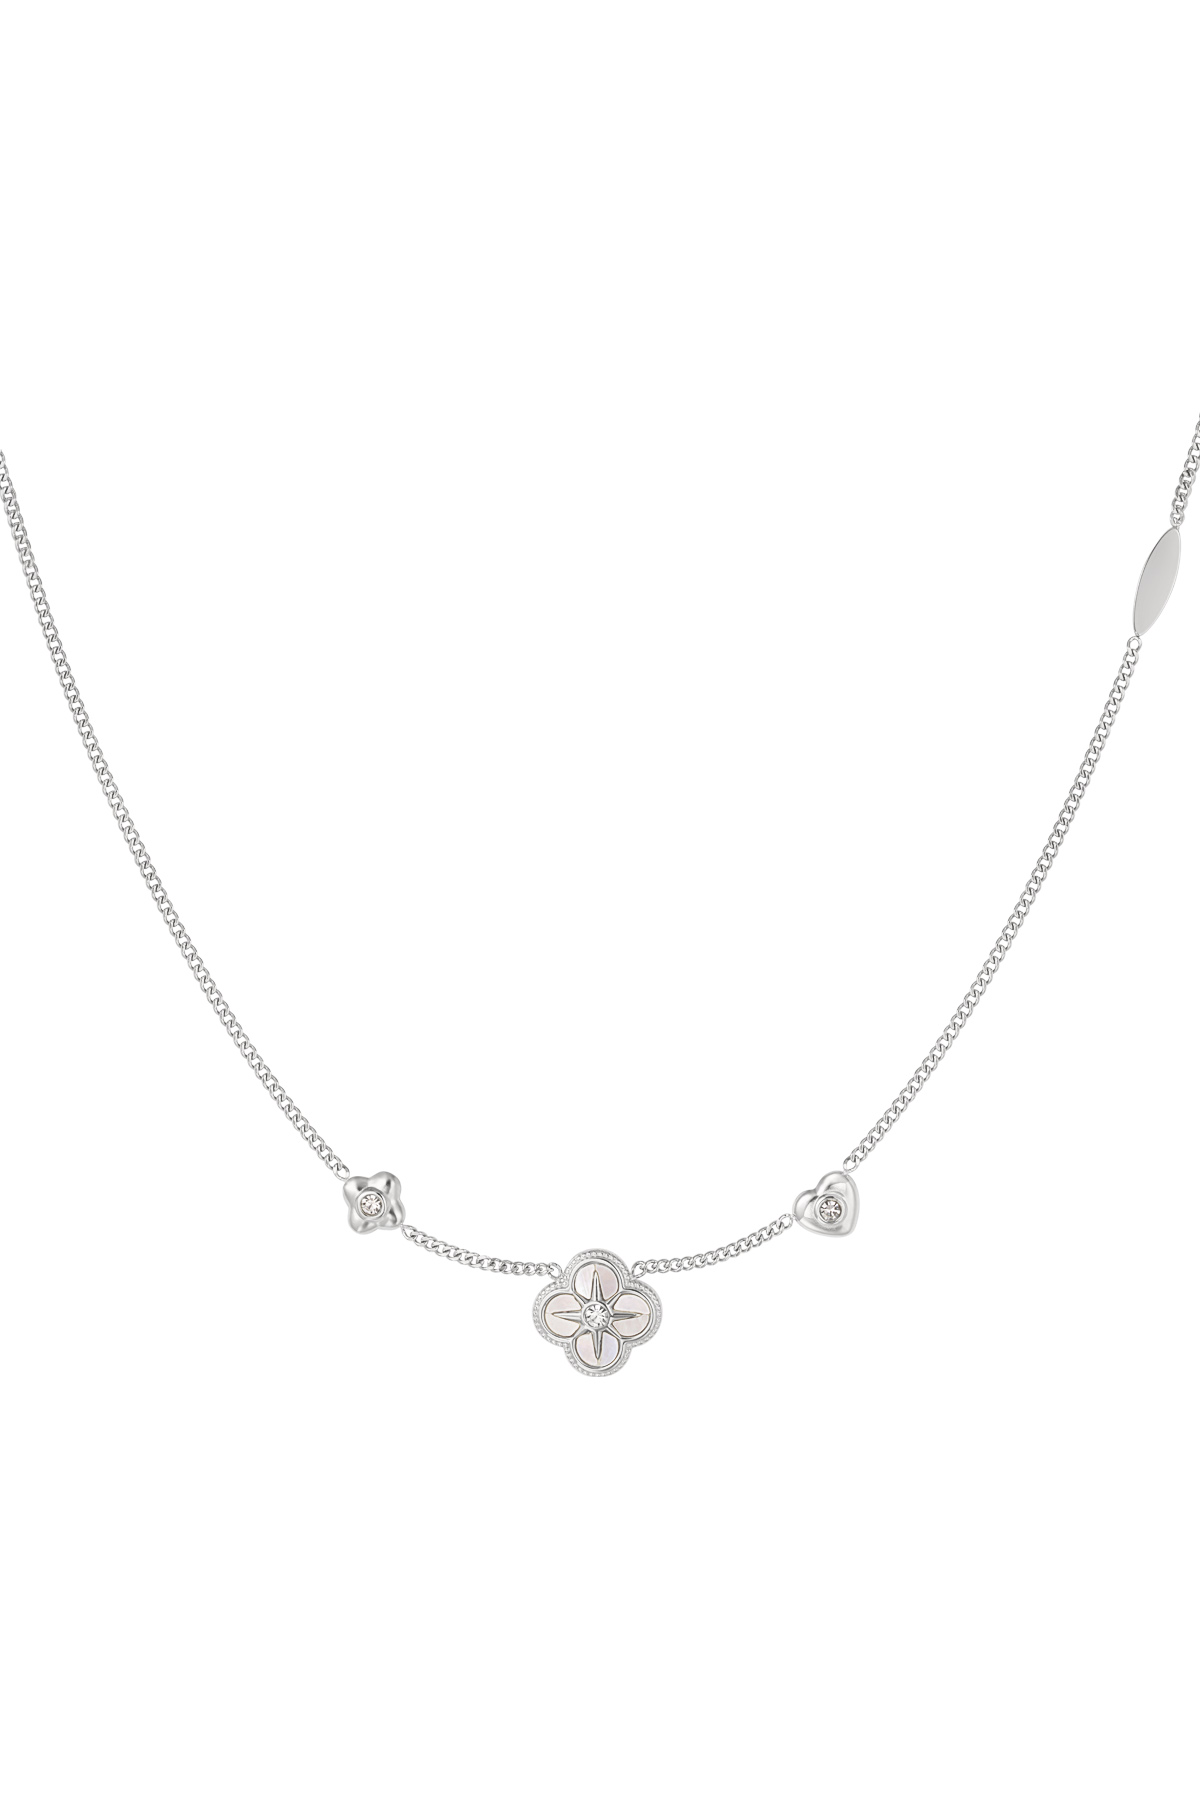 Necklace 3 clovers - silver h5 